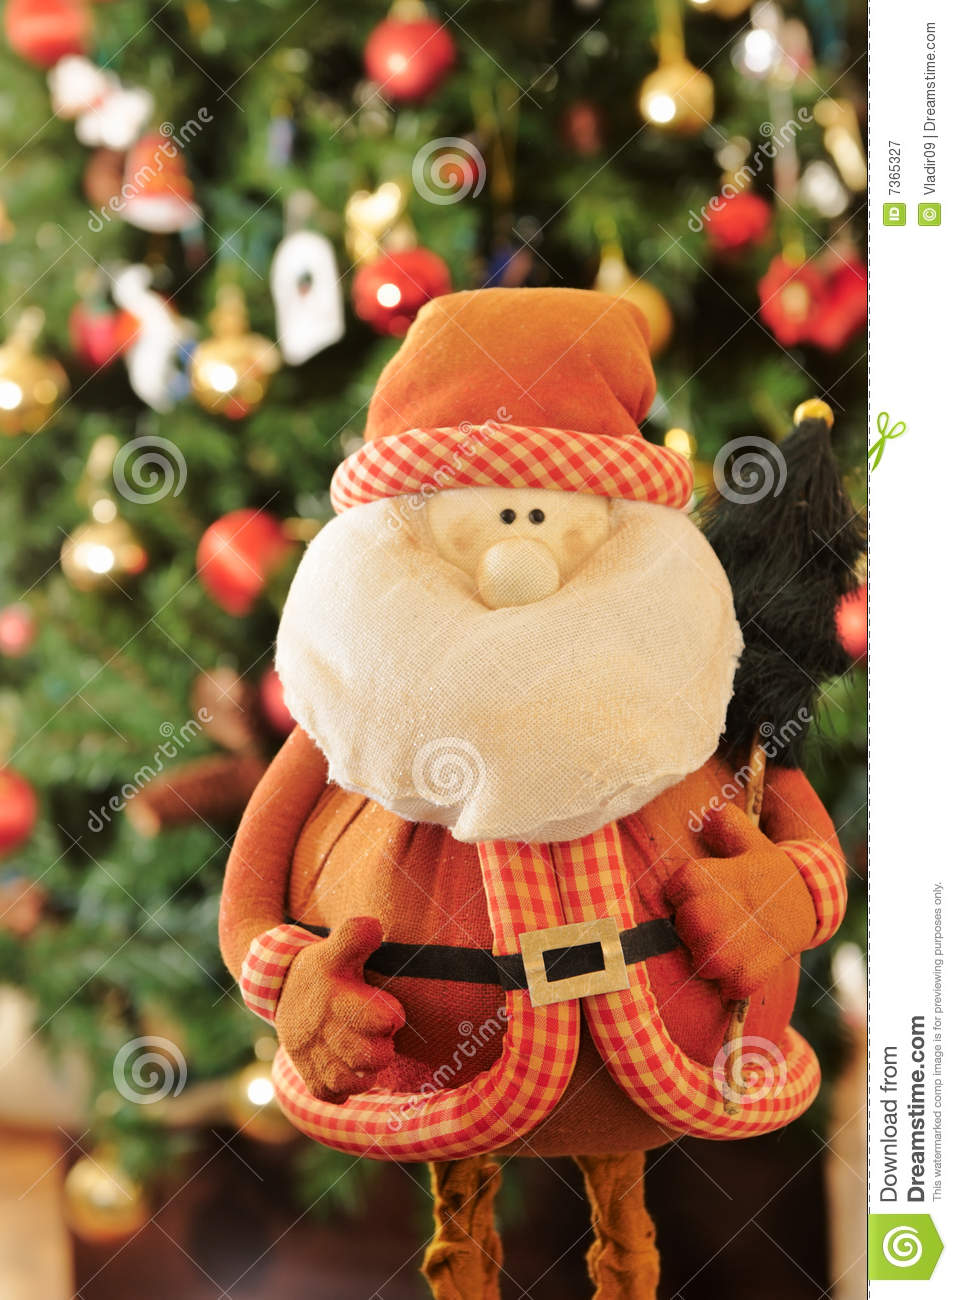 Sweet Rag Santa Doll Looking To The Camera With A Christmas Tree    